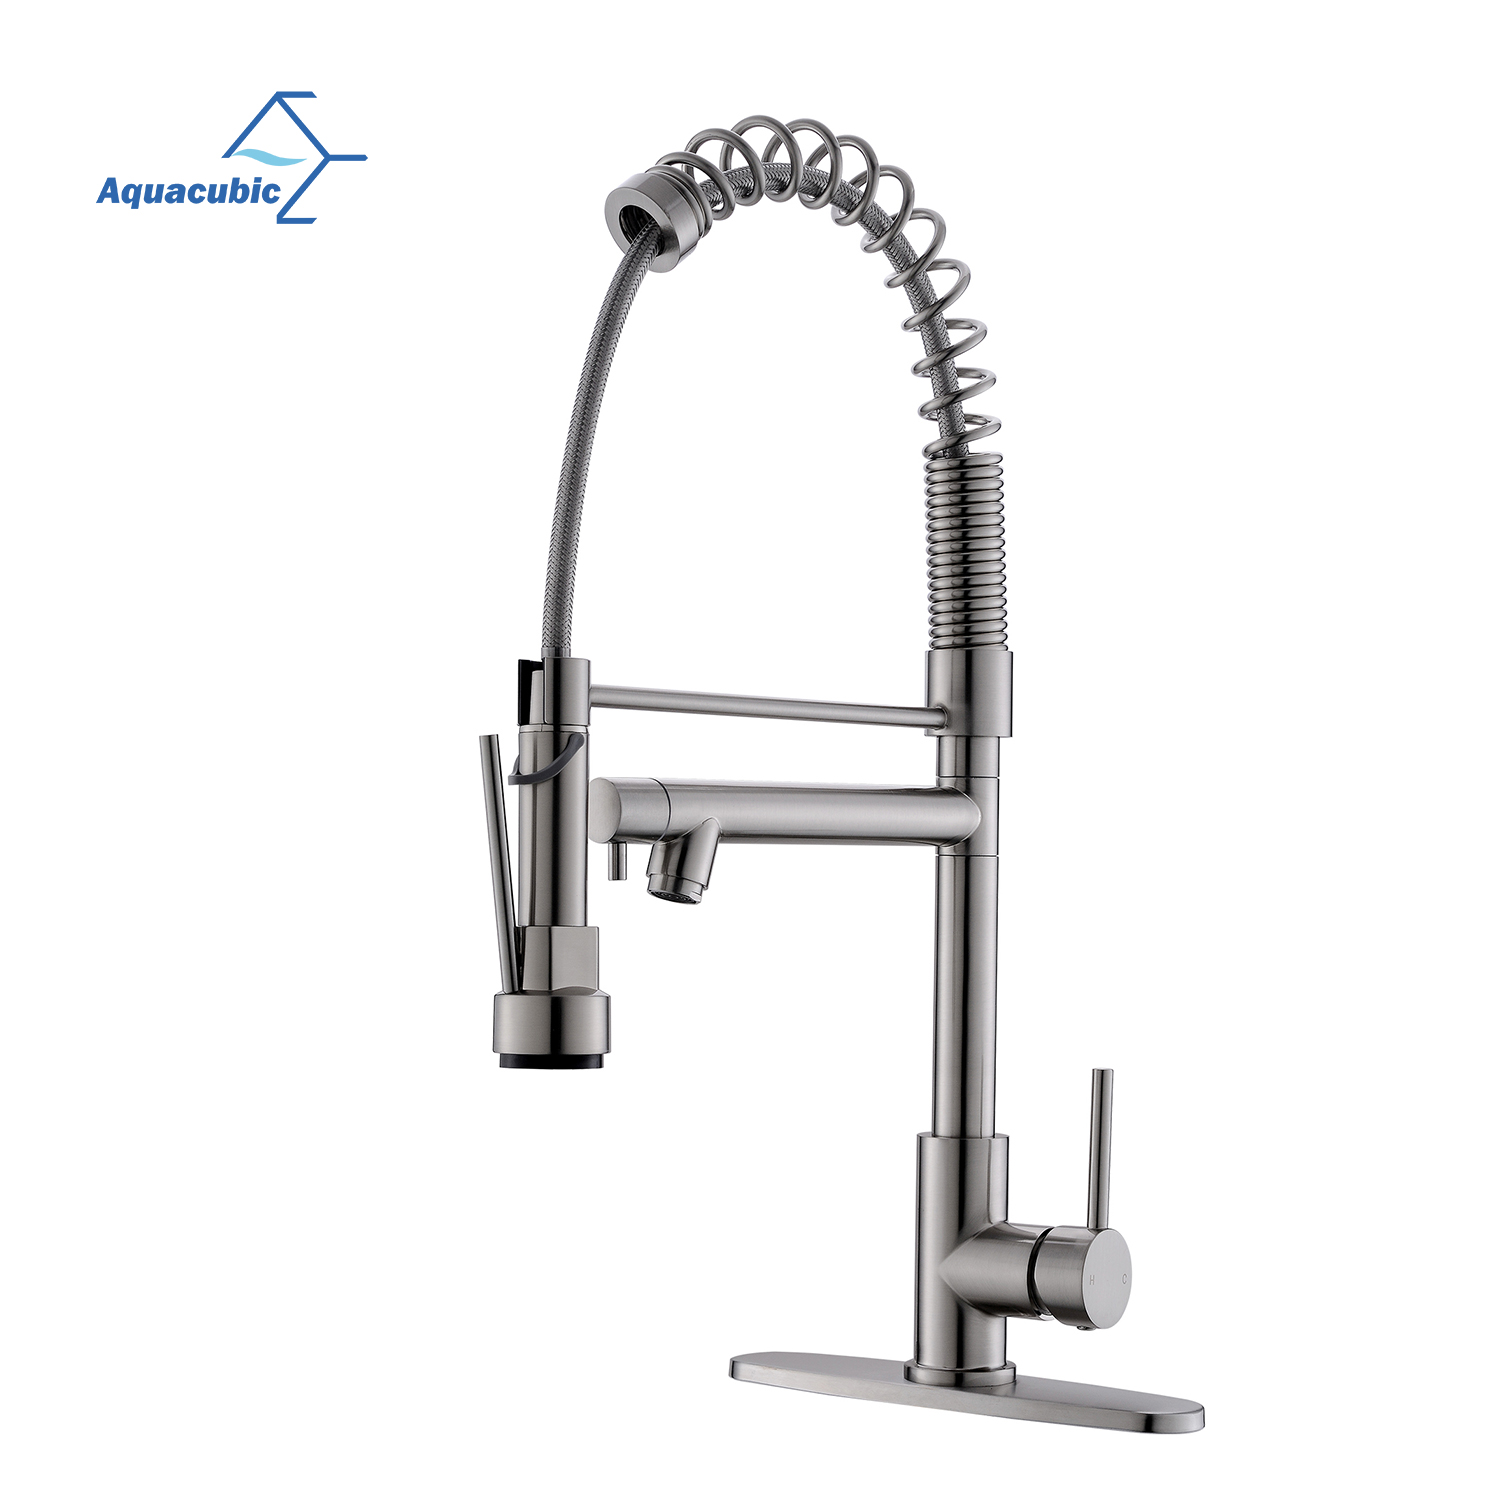 Aquacubic cUPC Instant Deck mount Washbasin Pull Out Kitchen Faucet